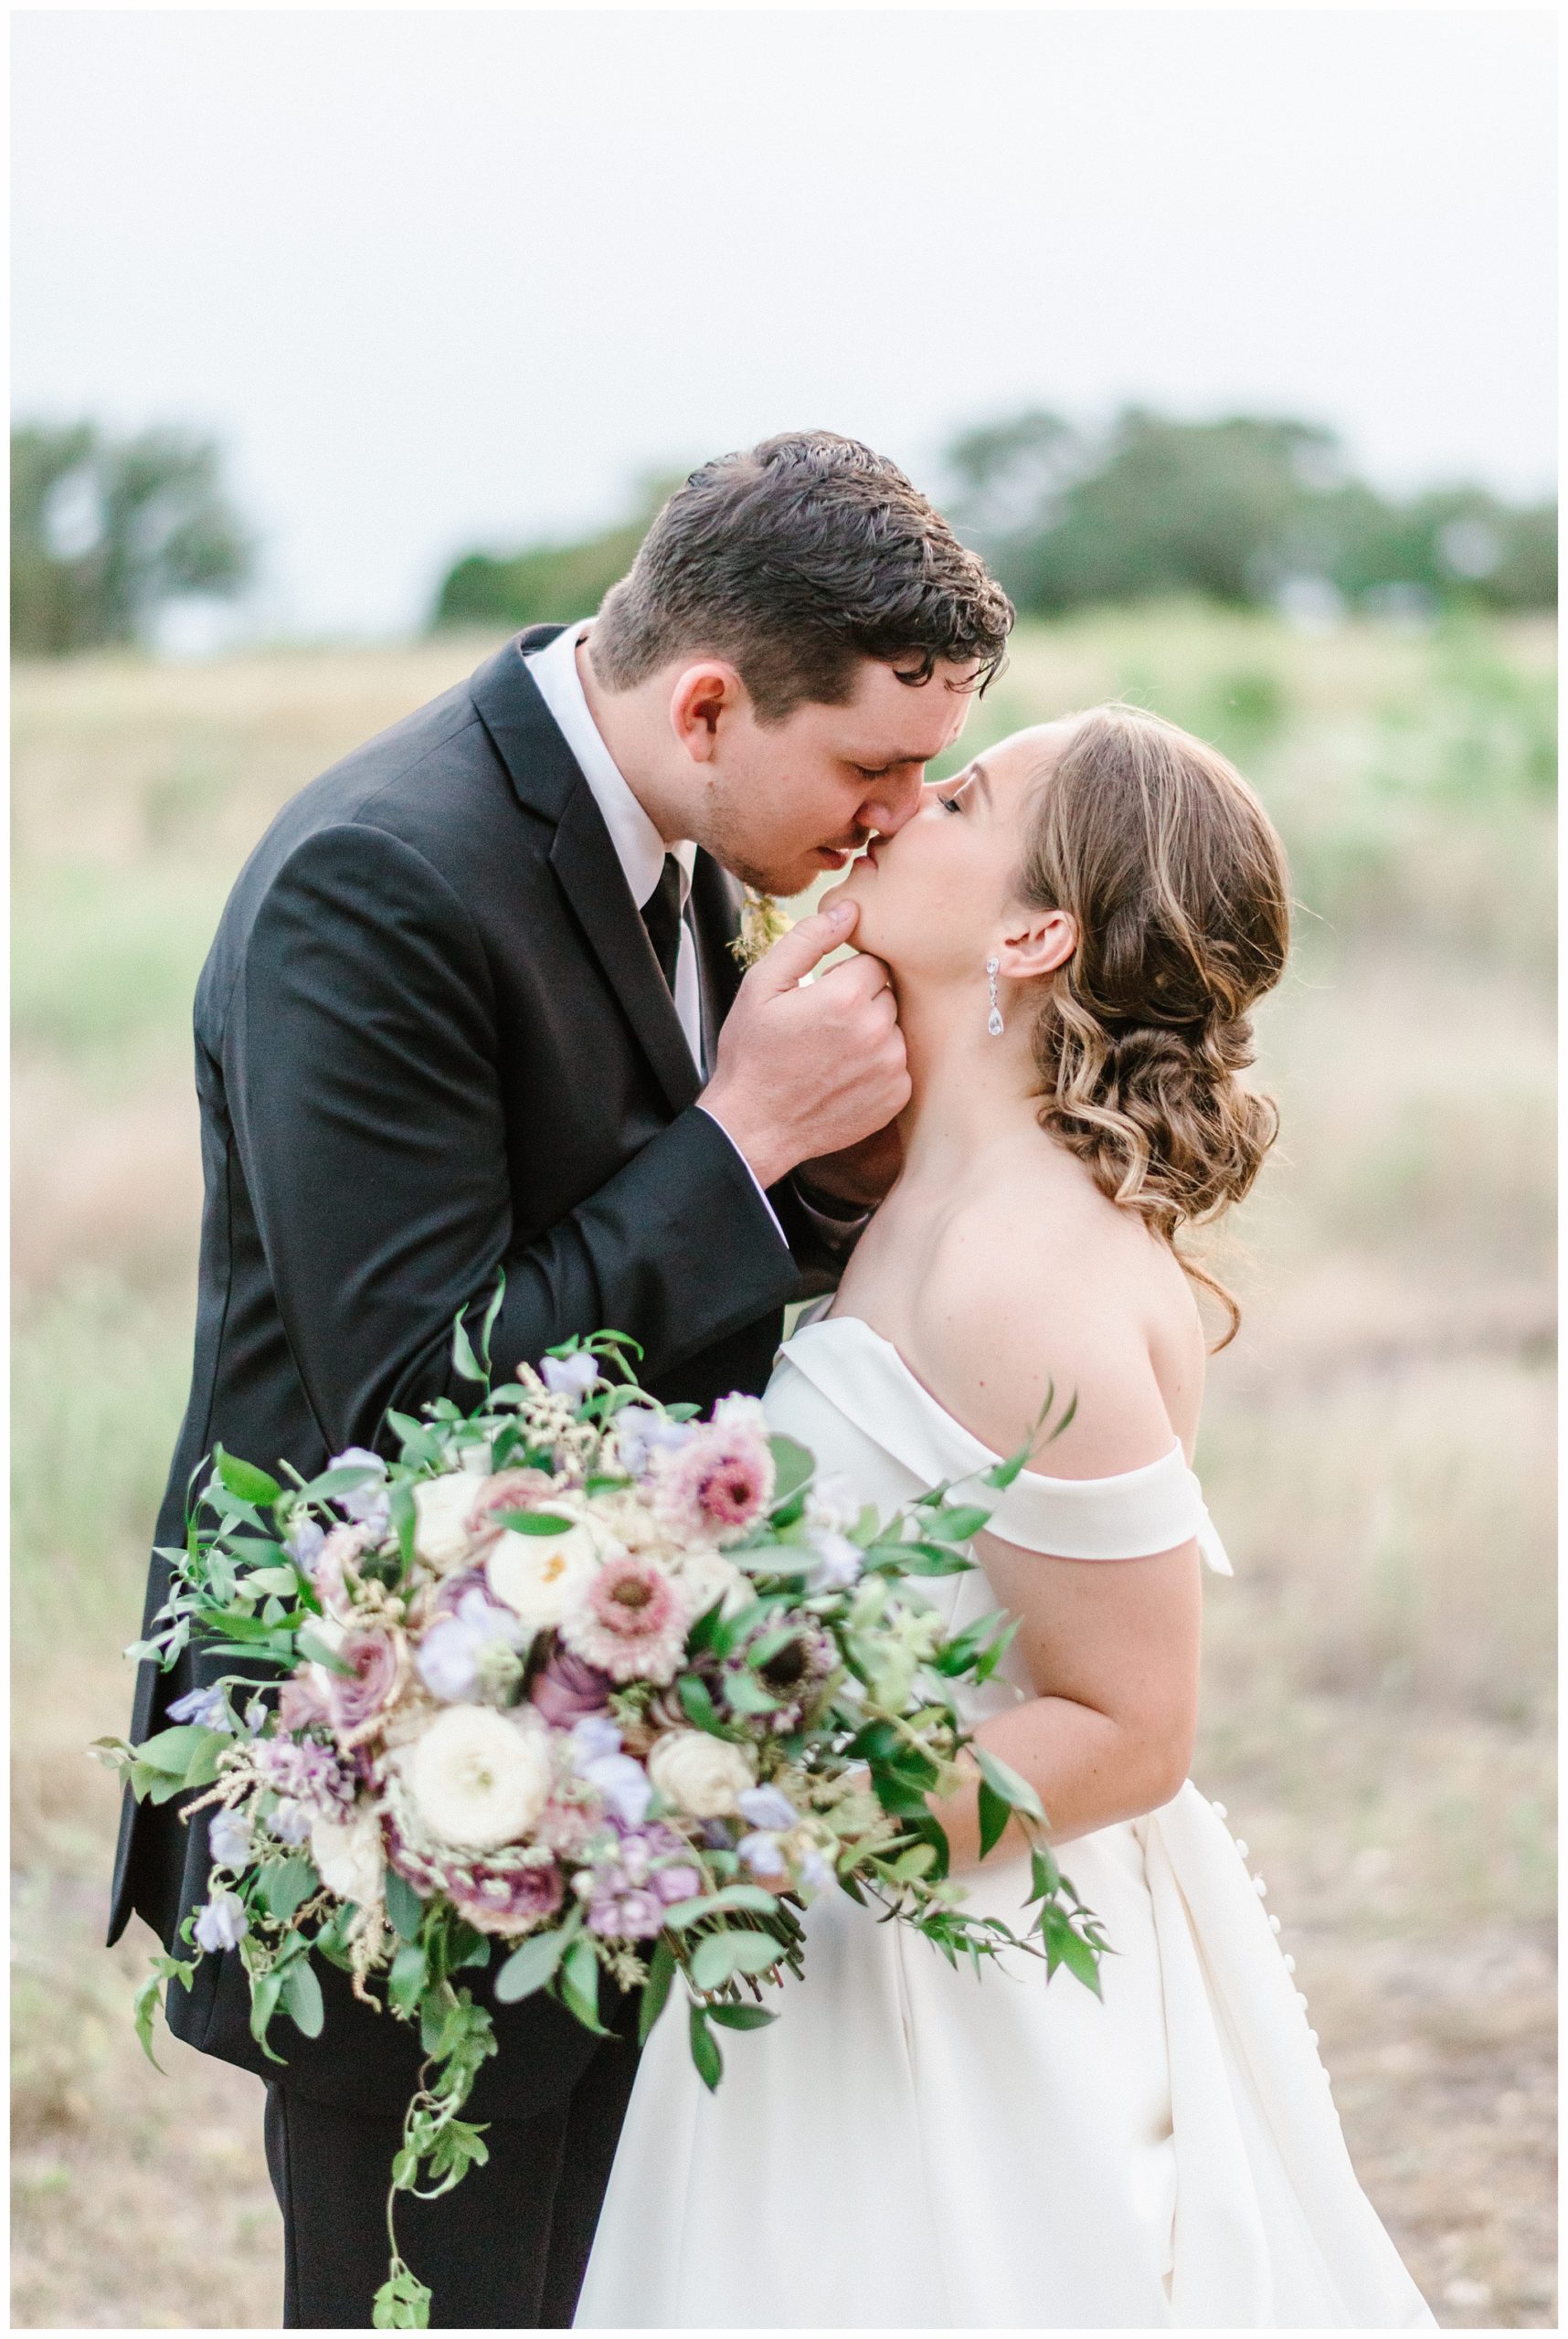 Bride and Groom Portrait with Beautiful Violet and Plum Bridal Bouquet